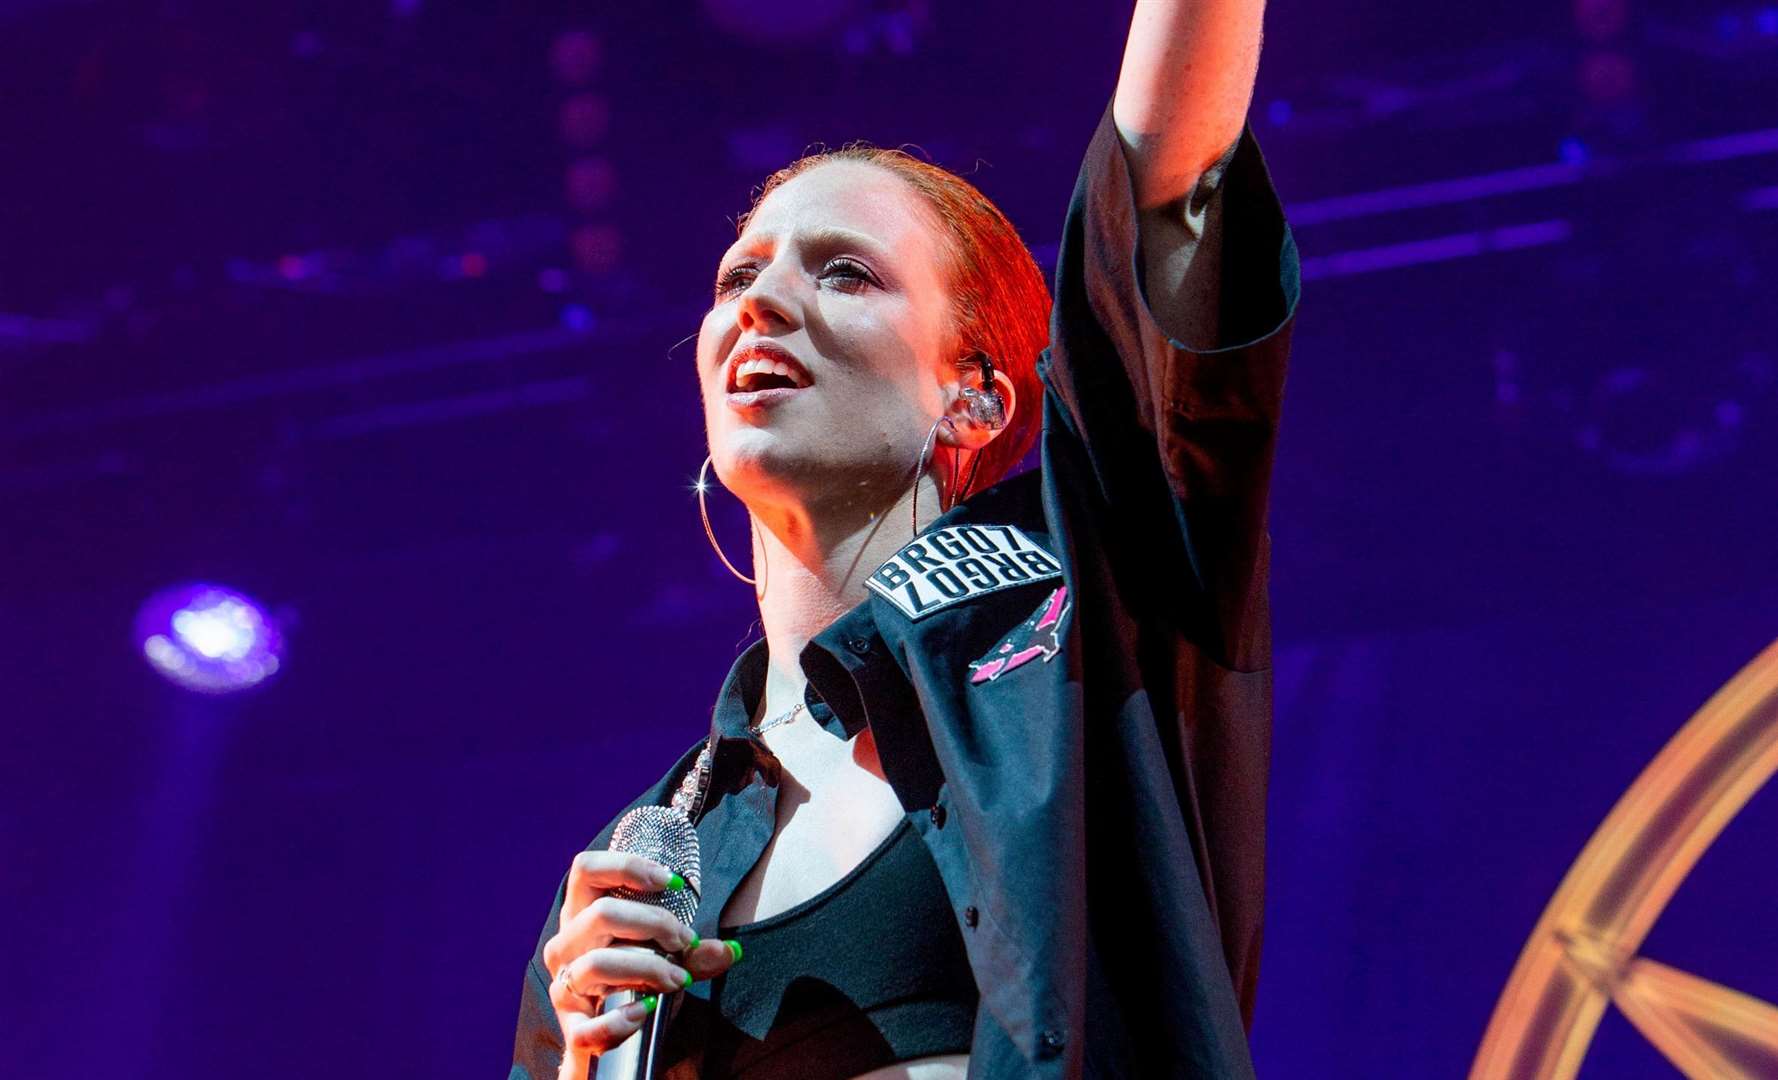 Popstar Jess Glynne is one of the names hitting the Scenic Stage this year